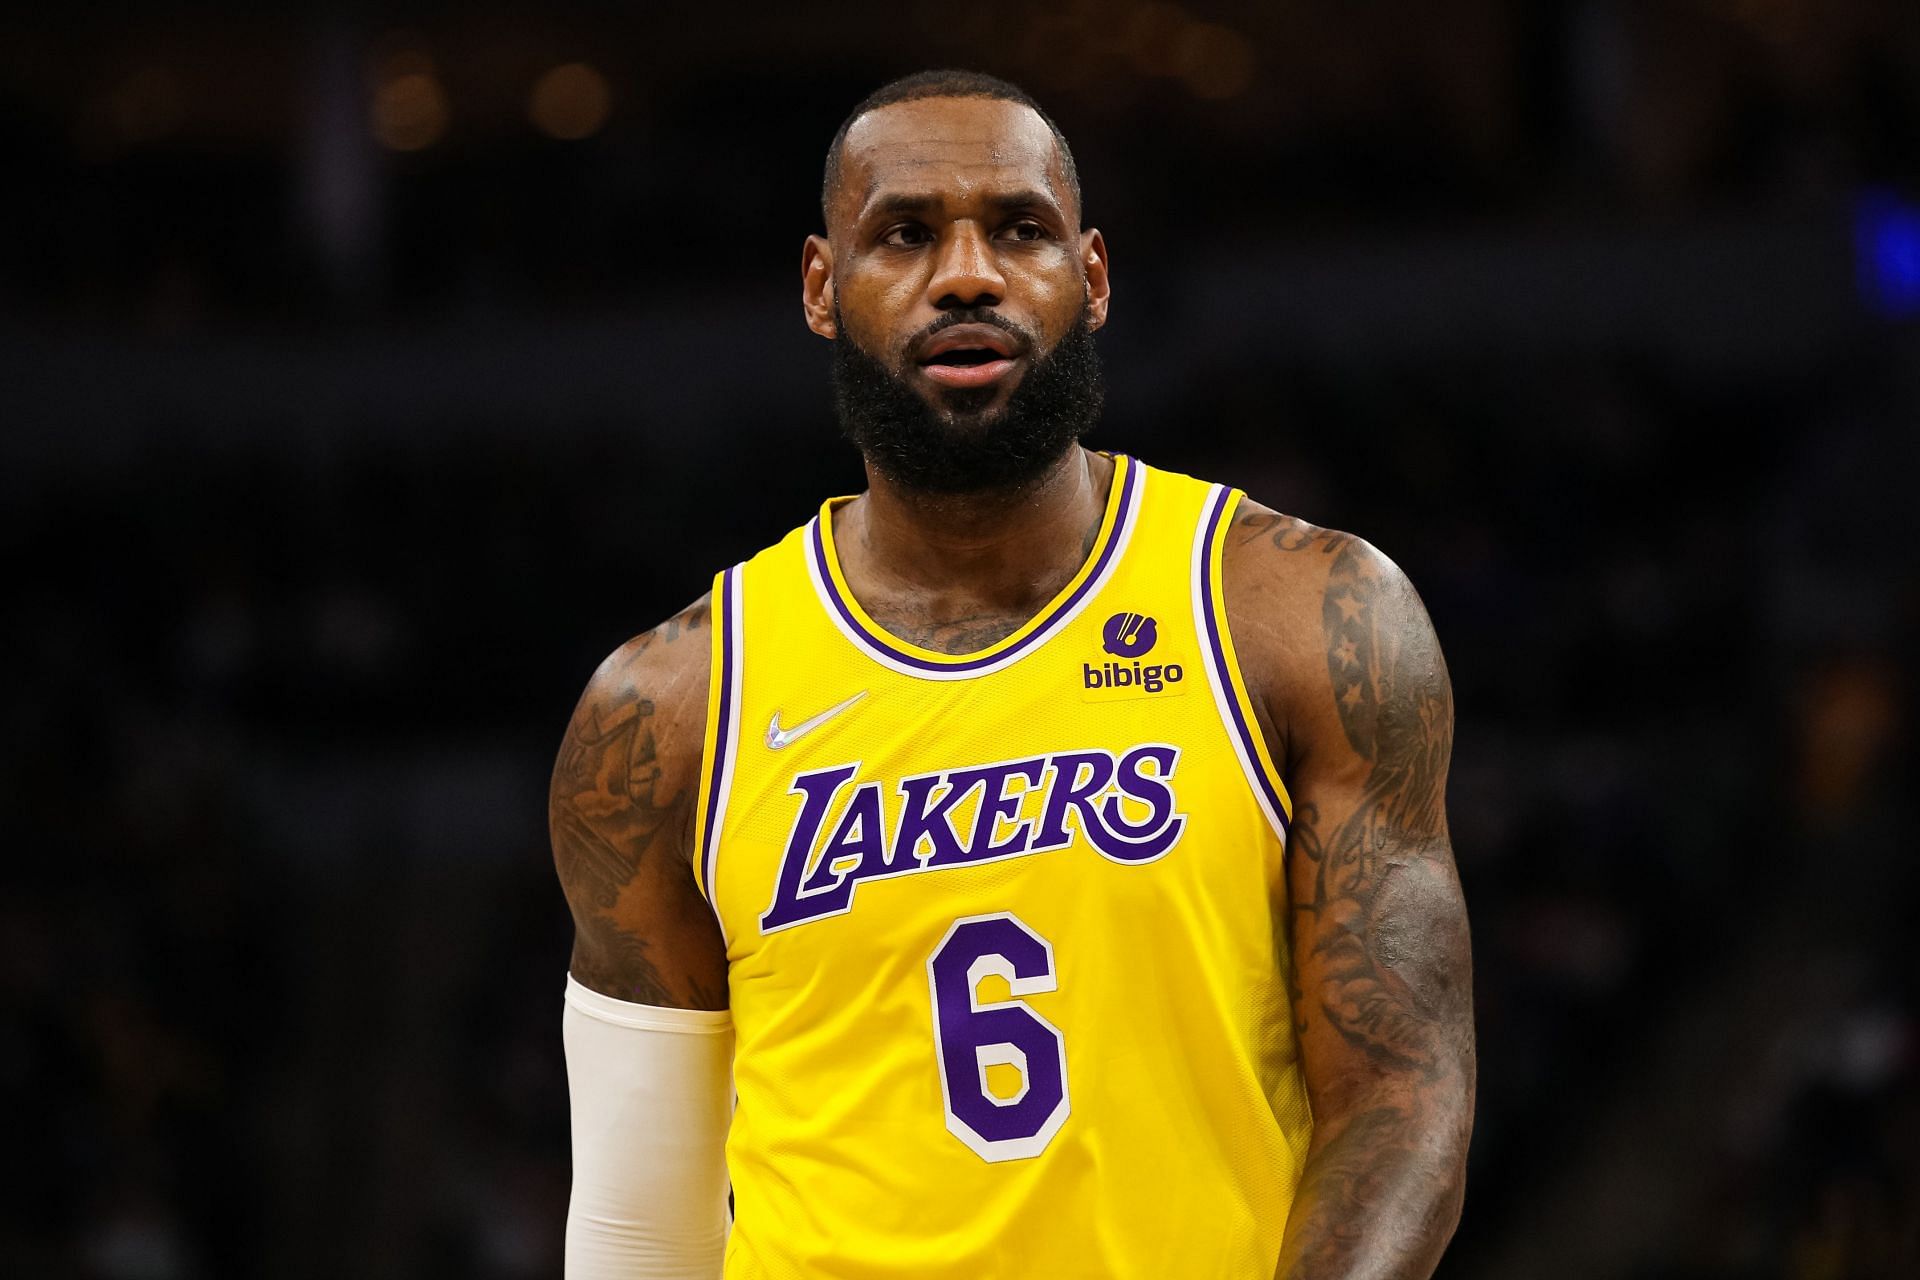 LeBron James looks on at an LA Lakers game